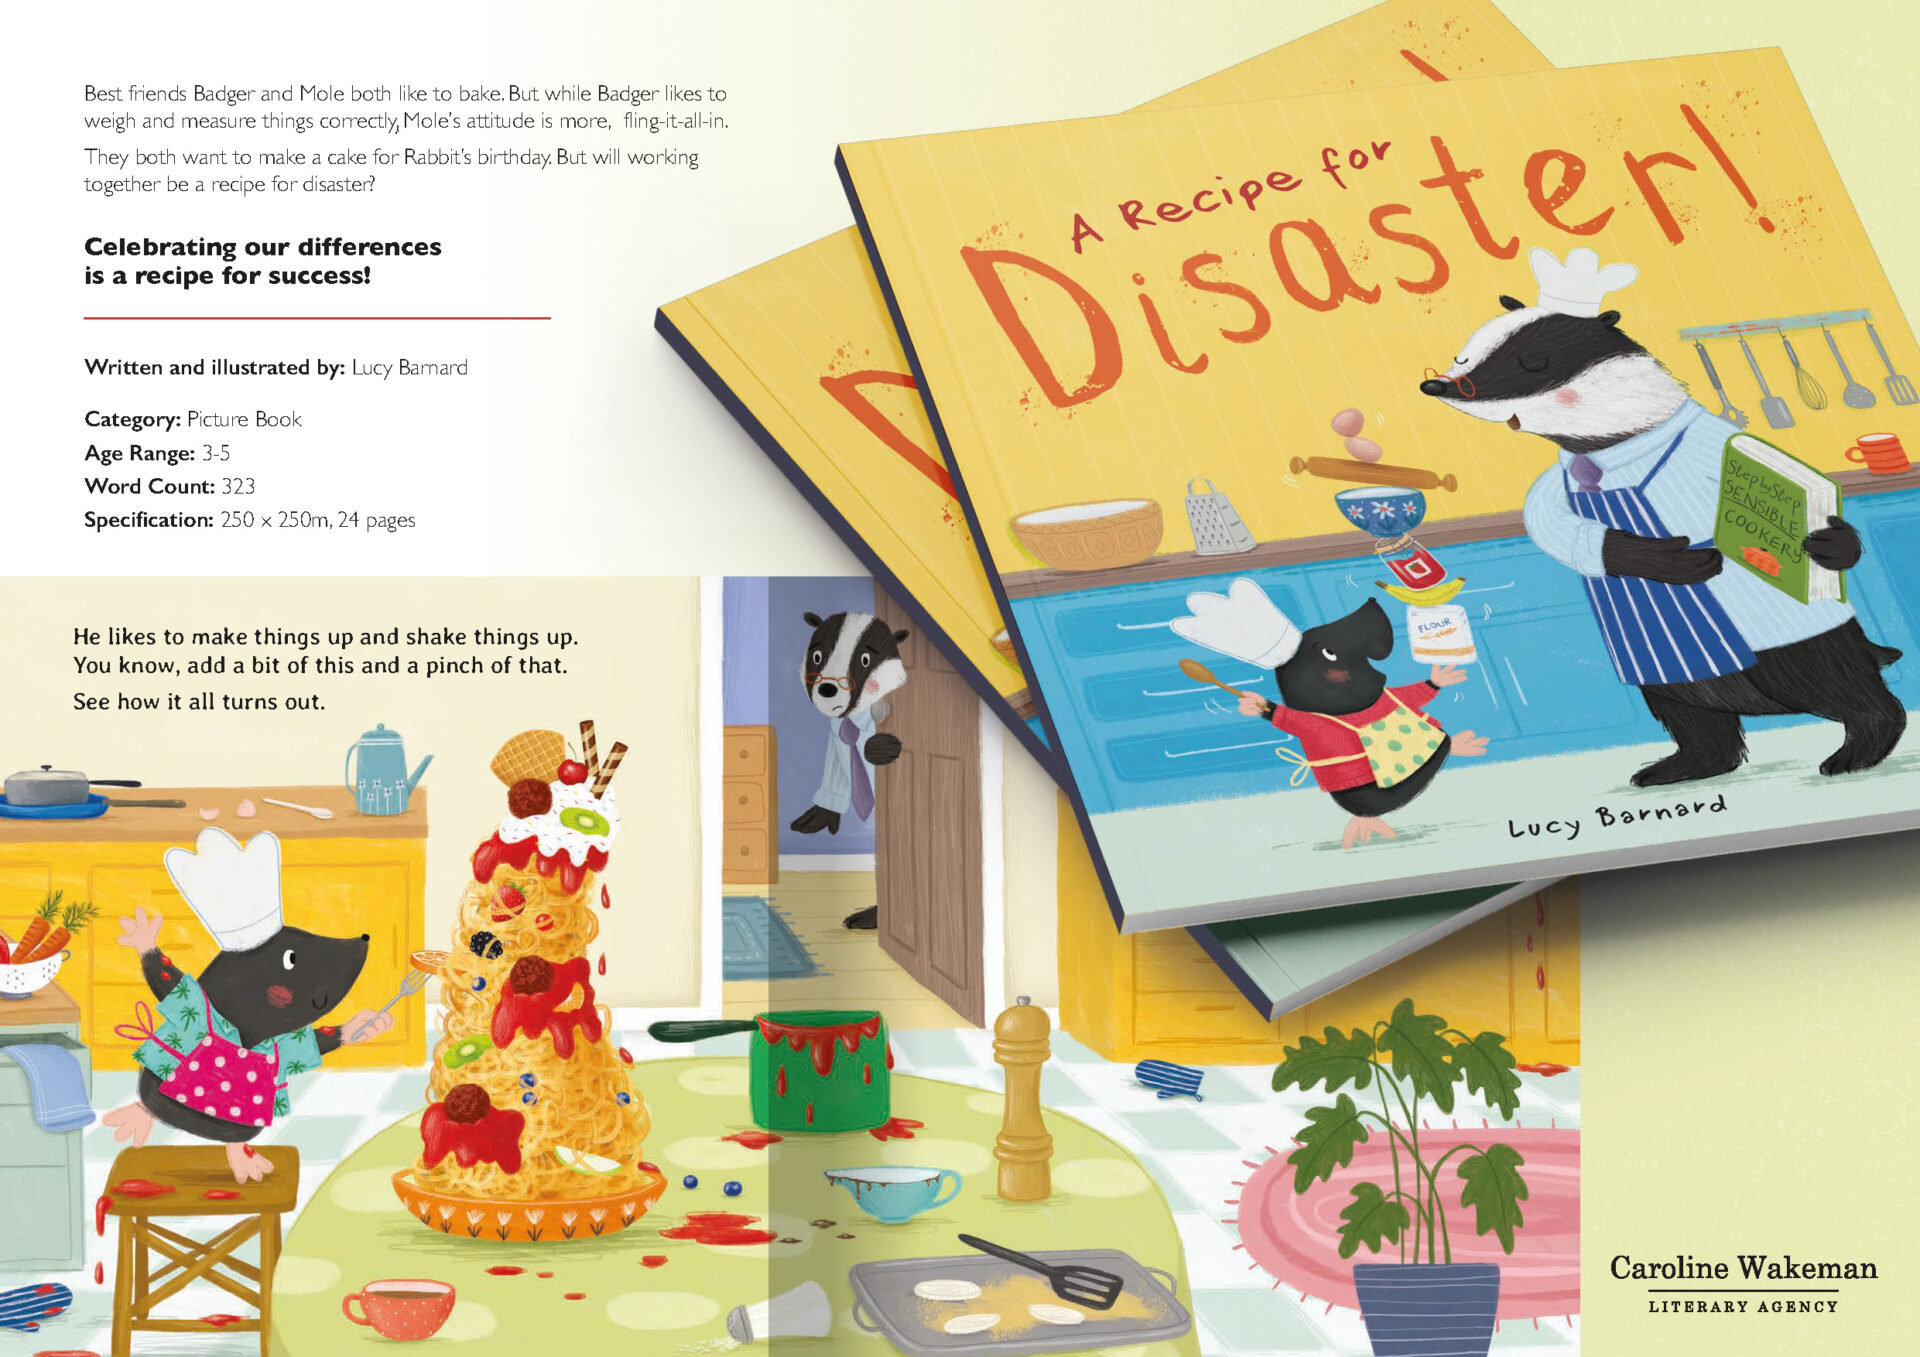 A Recipe For Disaster Header Image